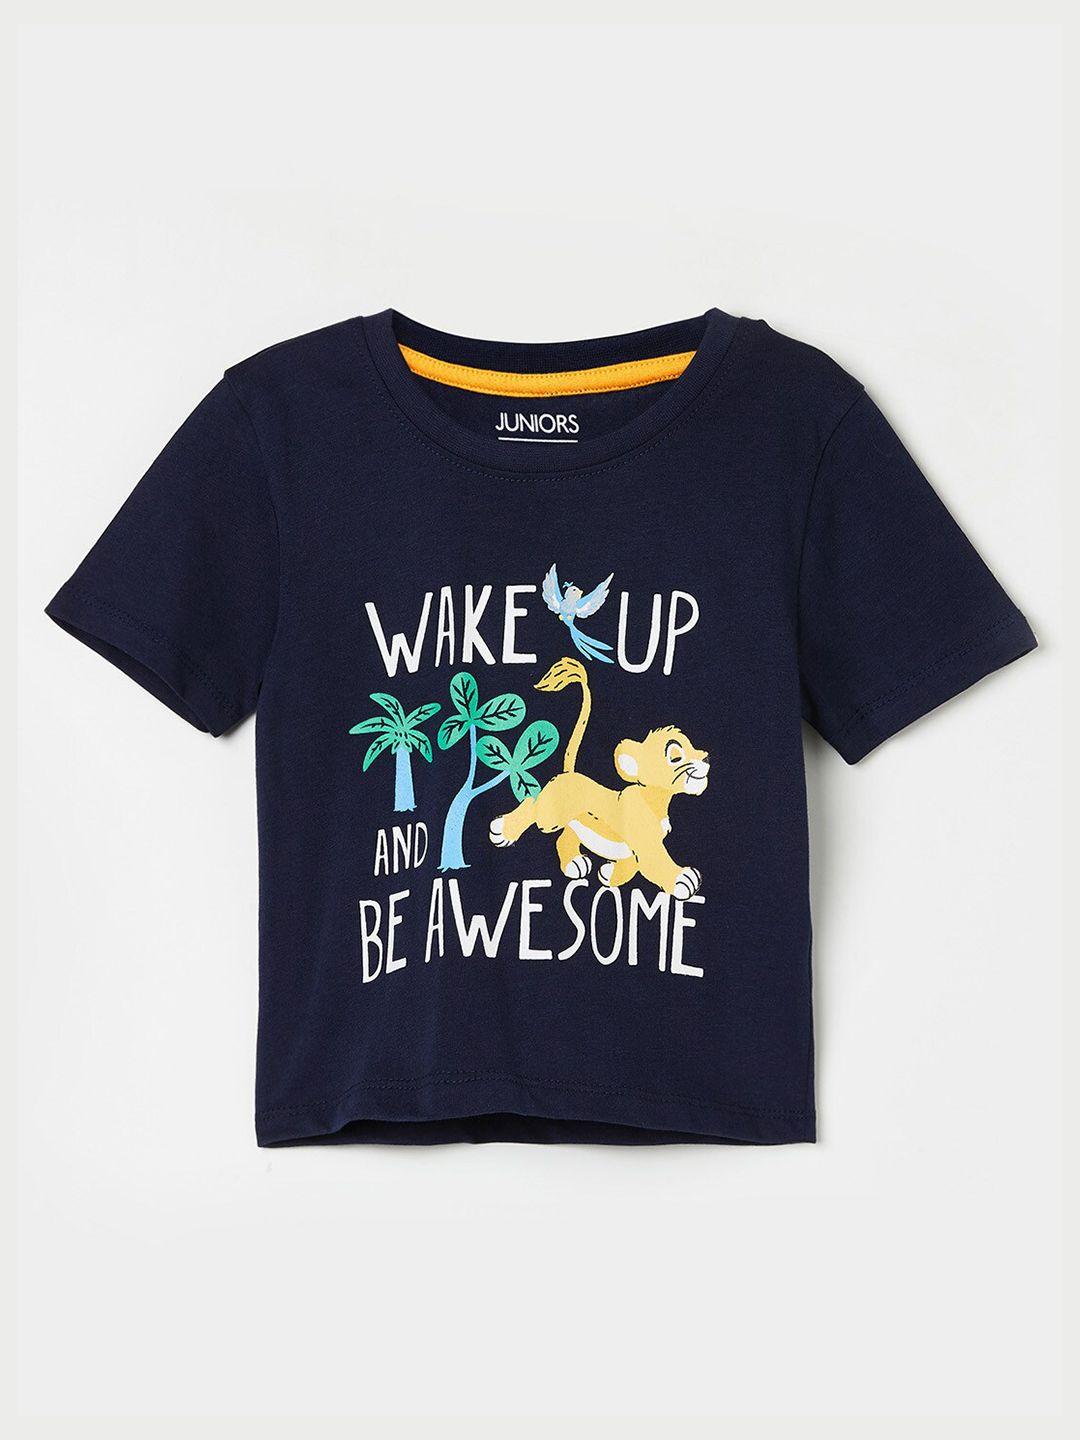 juniors by lifestyle boys navy blue printed t-shirt